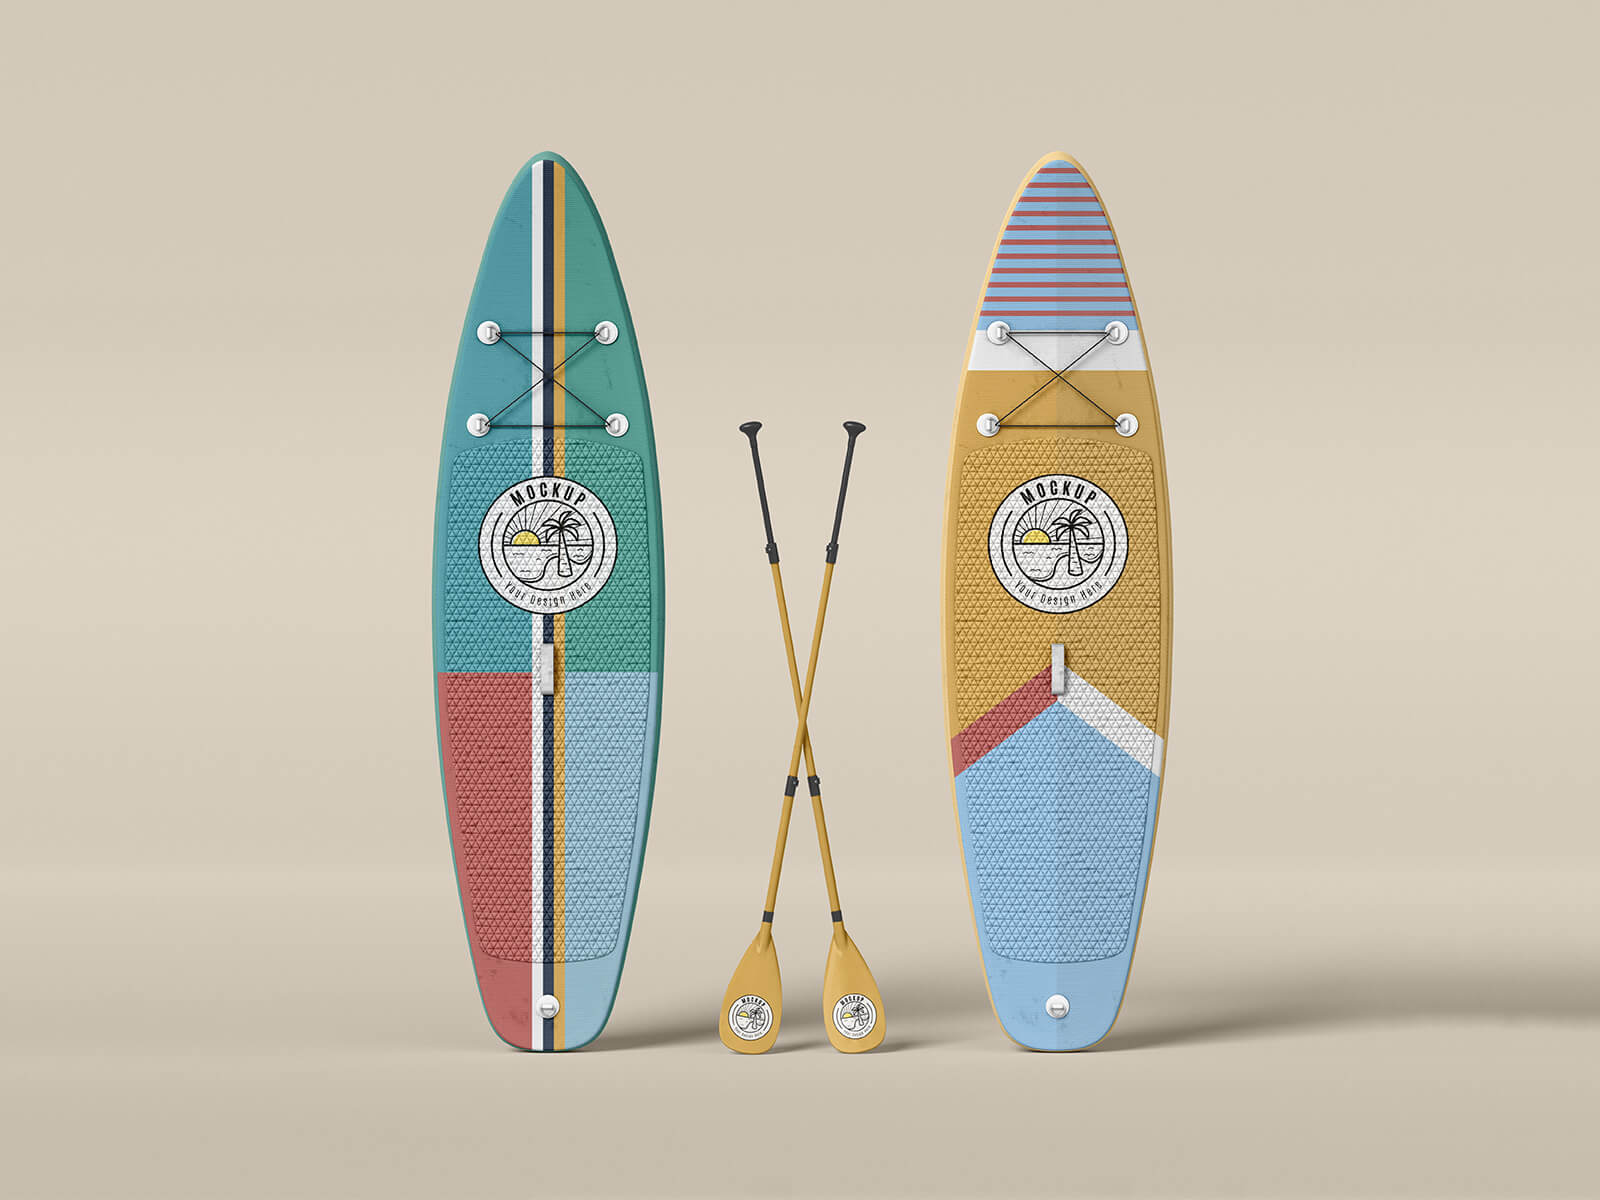 Free-Surf-Board-With-Paddles-Mockup-PSD-2